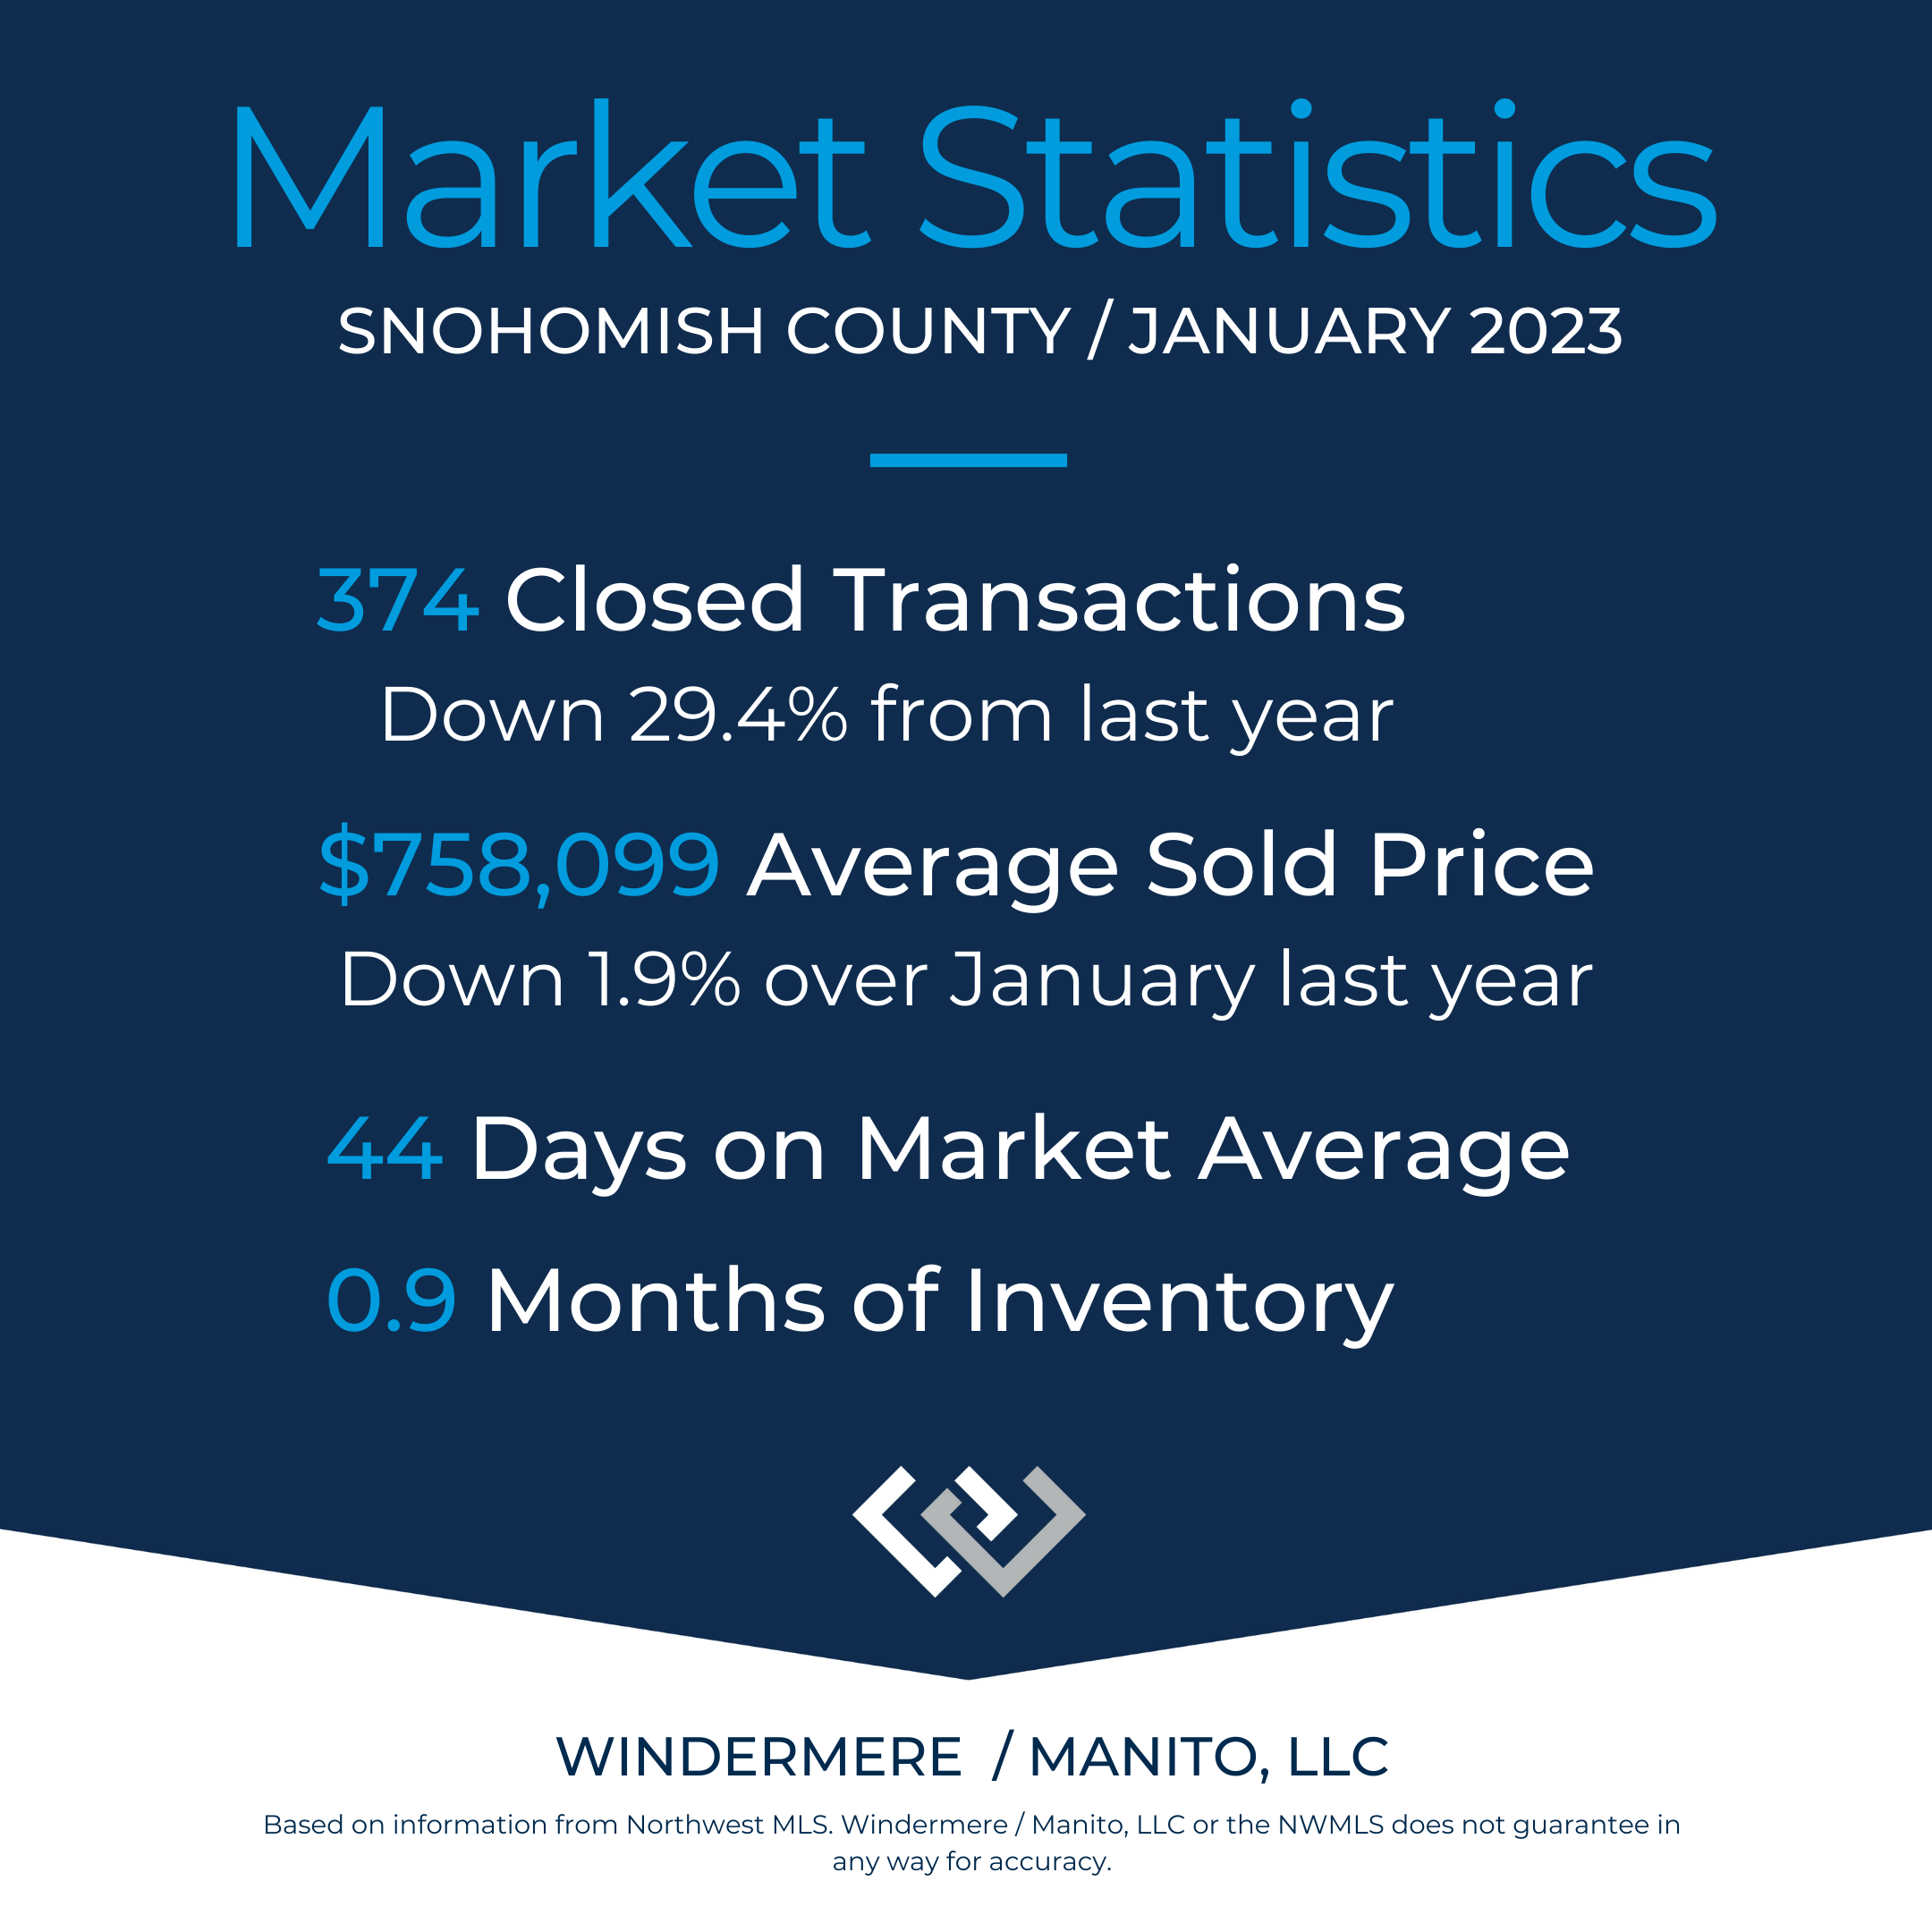 Market Stats for Snohomish County, January 2023